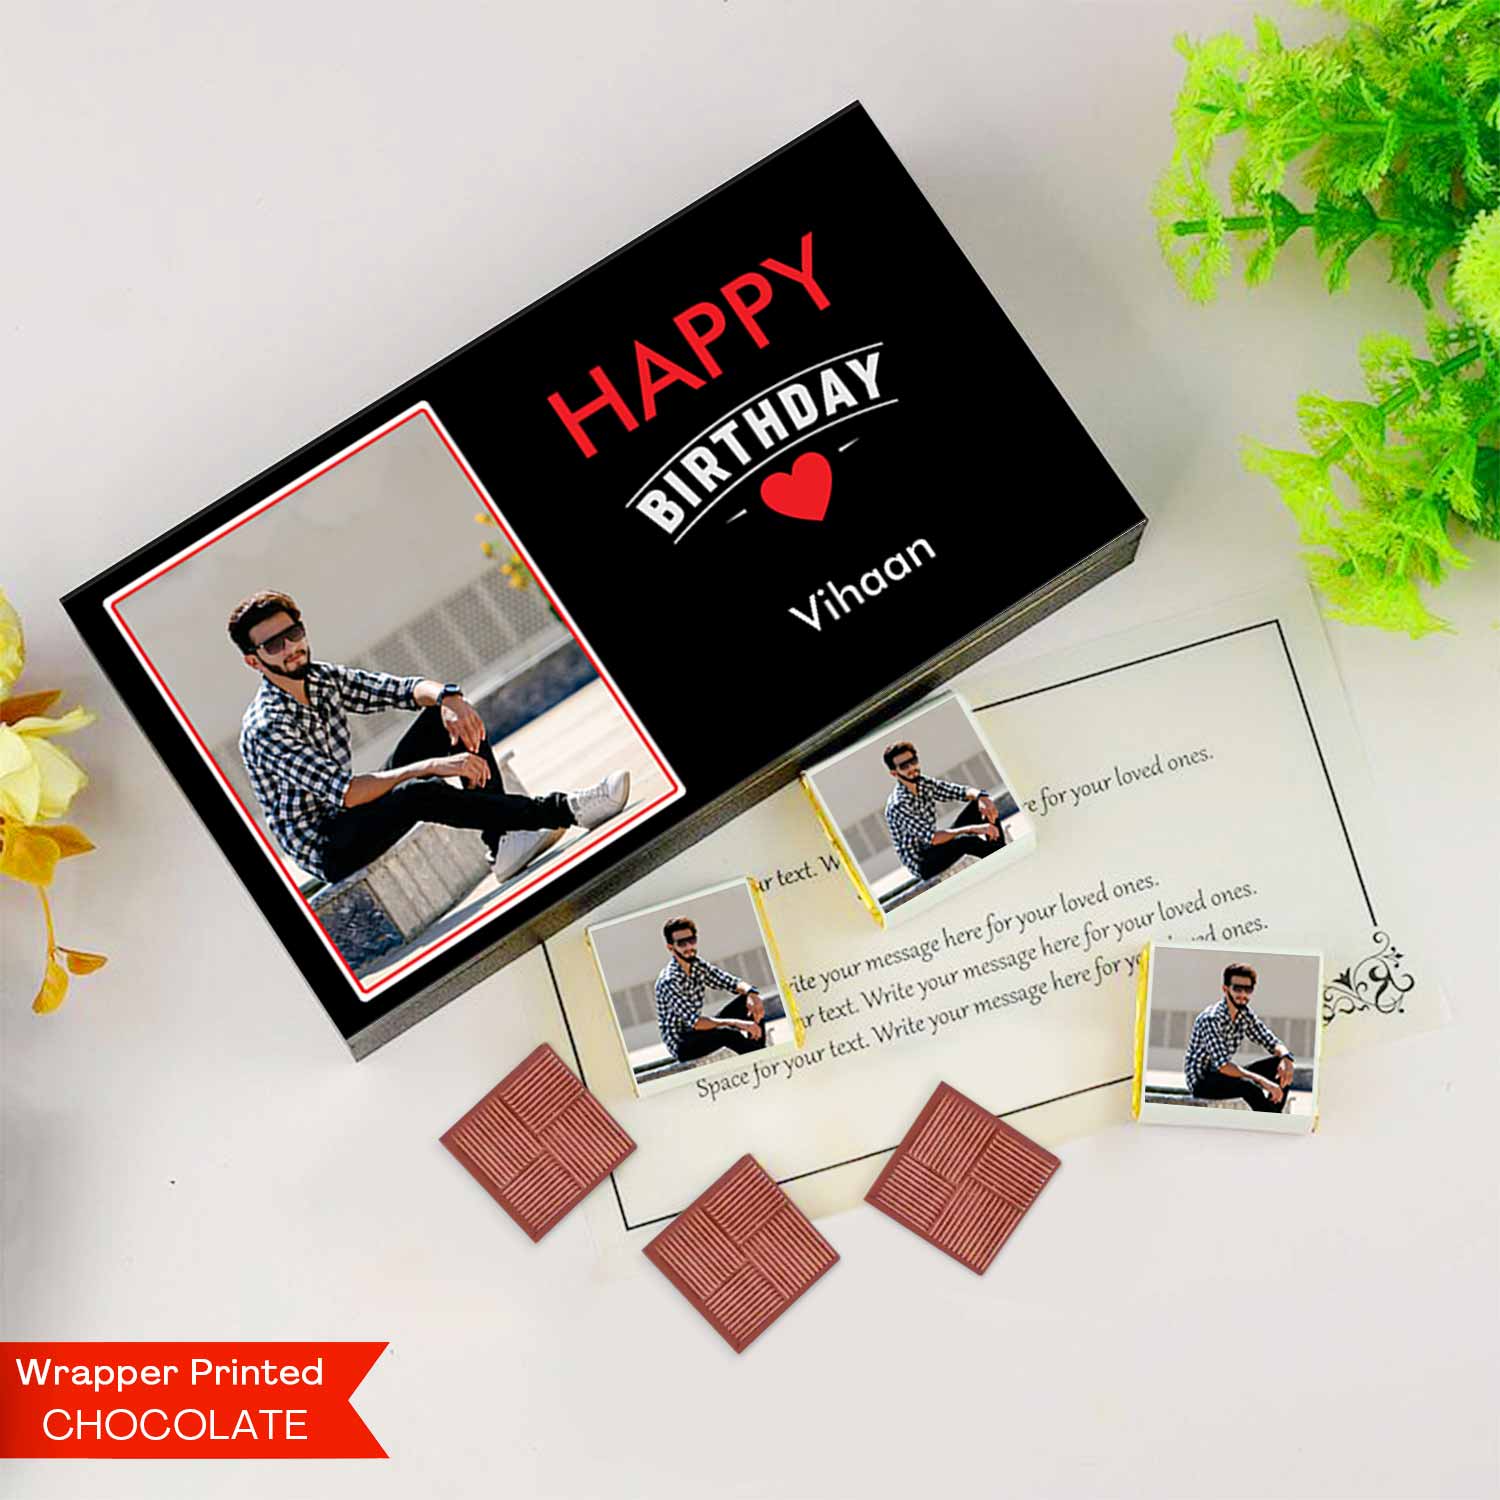  photo printed chocolate photo on chocolate wrappers personalised chocolates with names personalised chocolates with photo india personalised chocolates for birthdays photo chocolate box personalized chocolate gifts customised chocolate box